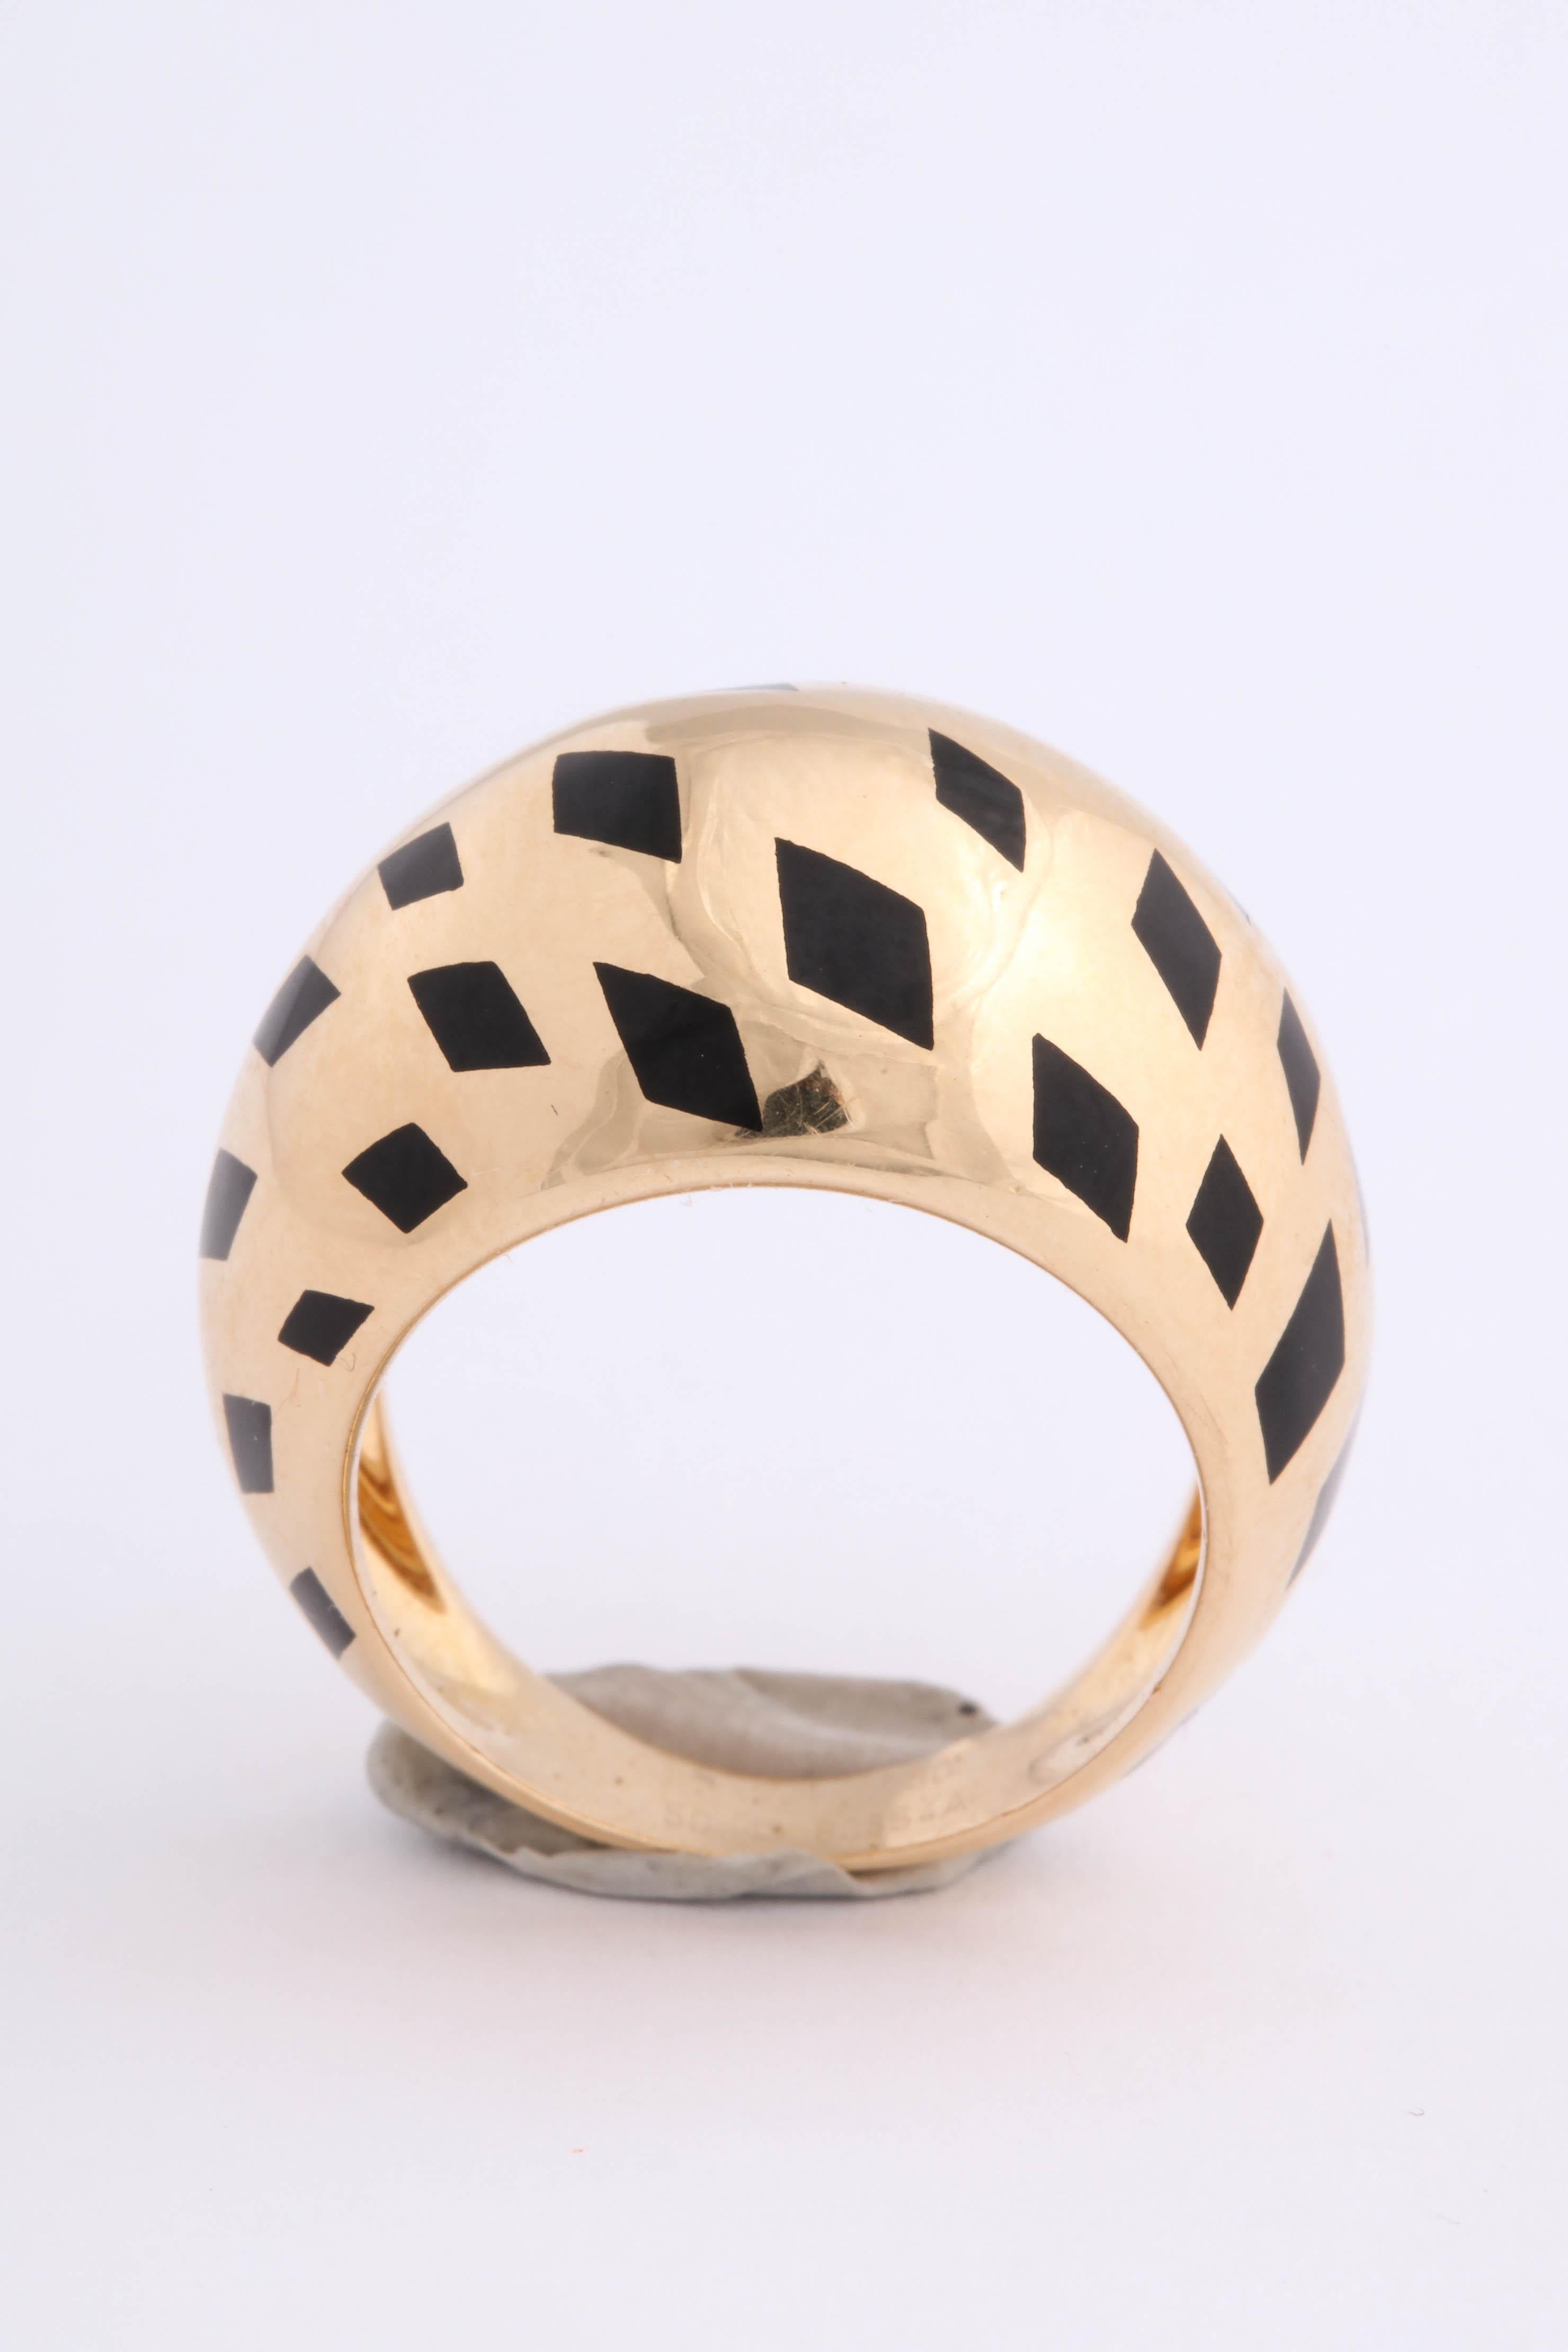 Chic Cartier pinky ring.  Highly Polished Dome with black enamel Leopard marks on a diagonal.  Made in France with French Hallmarks. Size 5.25.  Very chic - Ooh la la!